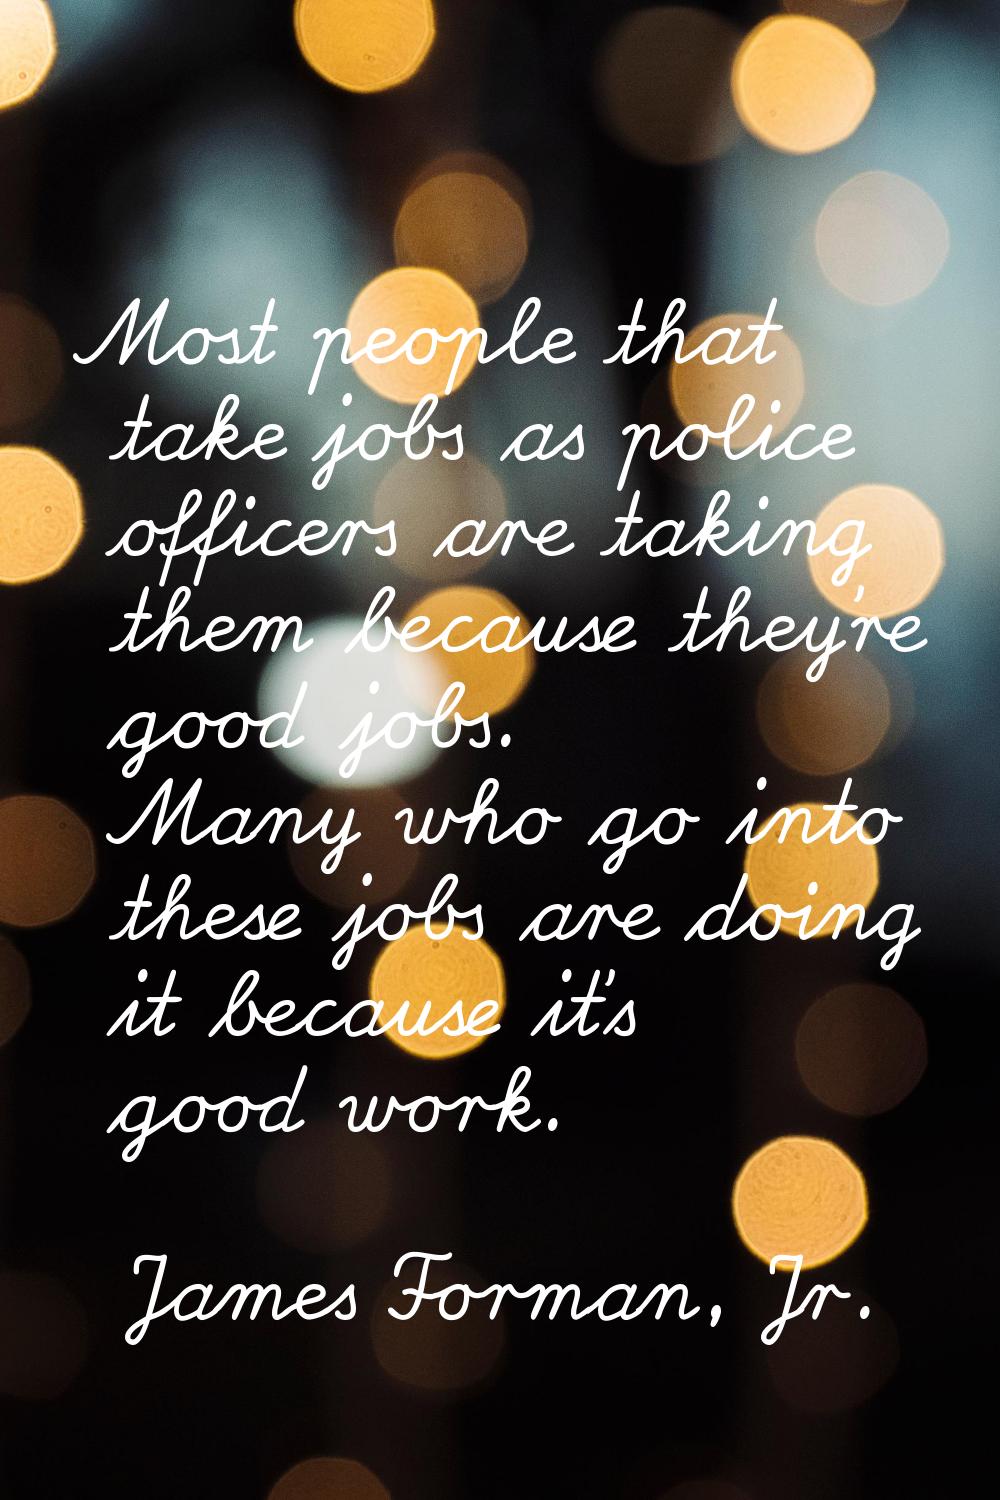 Most people that take jobs as police officers are taking them because they're good jobs. Many who g